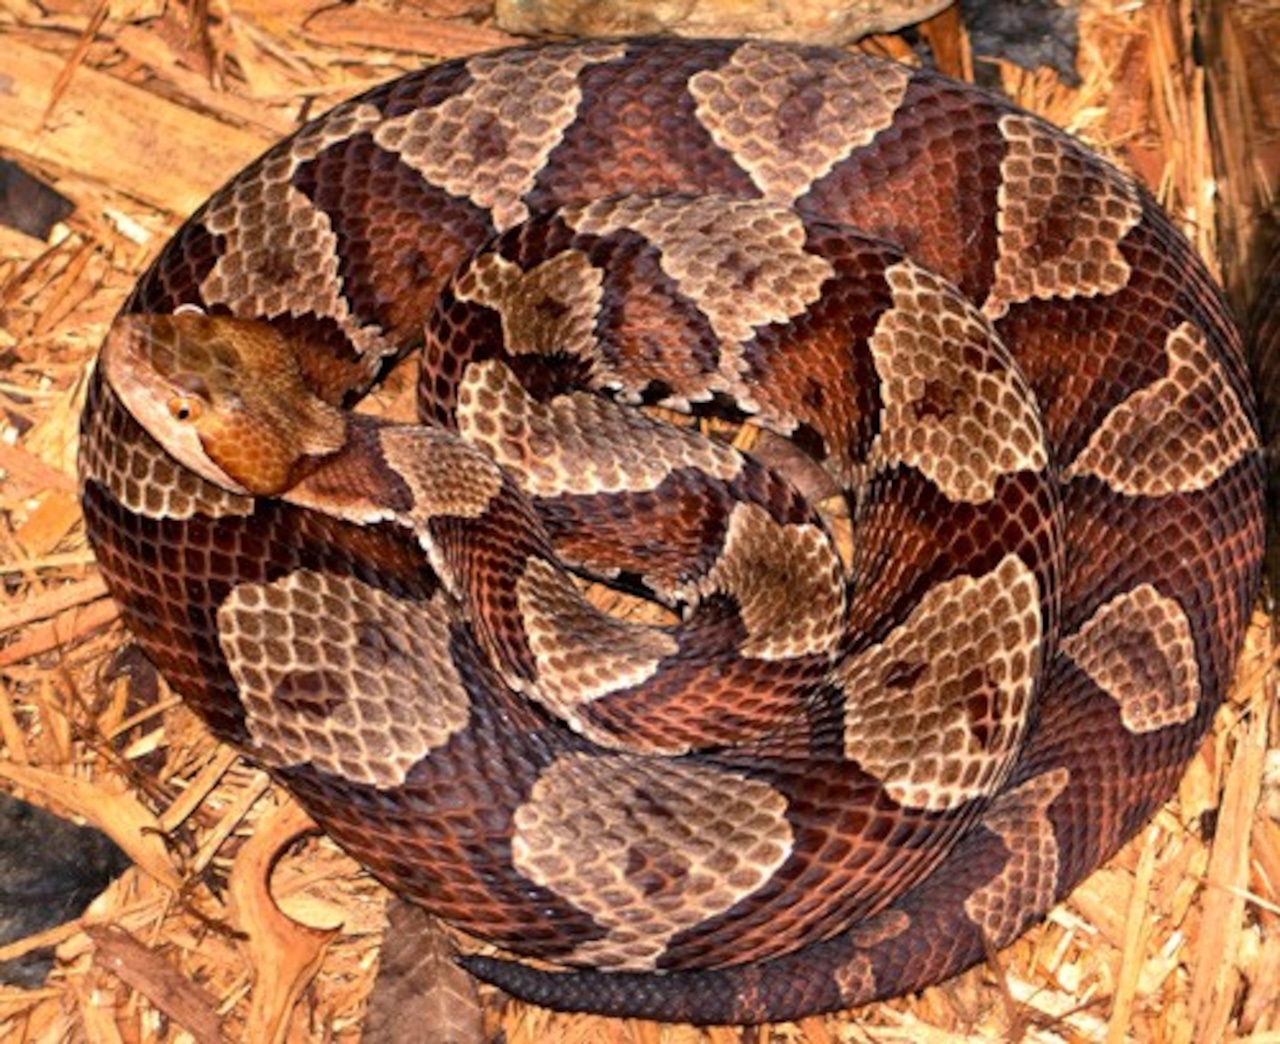 Copperhead snake bites candidate removing election signs [Video]